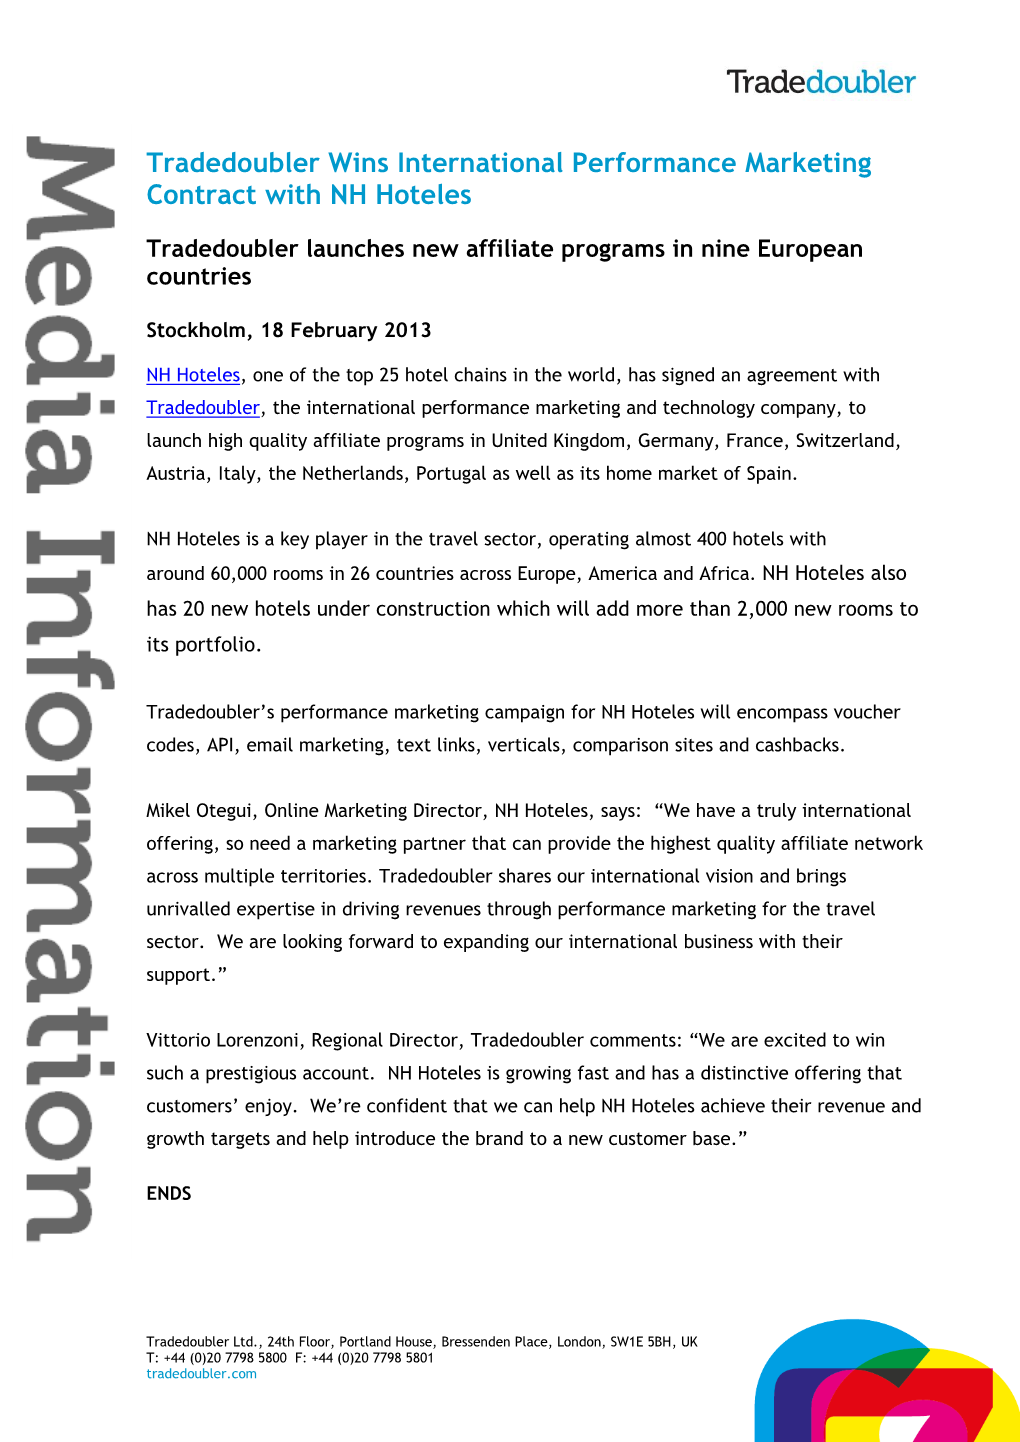 Tradedoubler Wins International Performance Marketing Contract with NH Hoteles